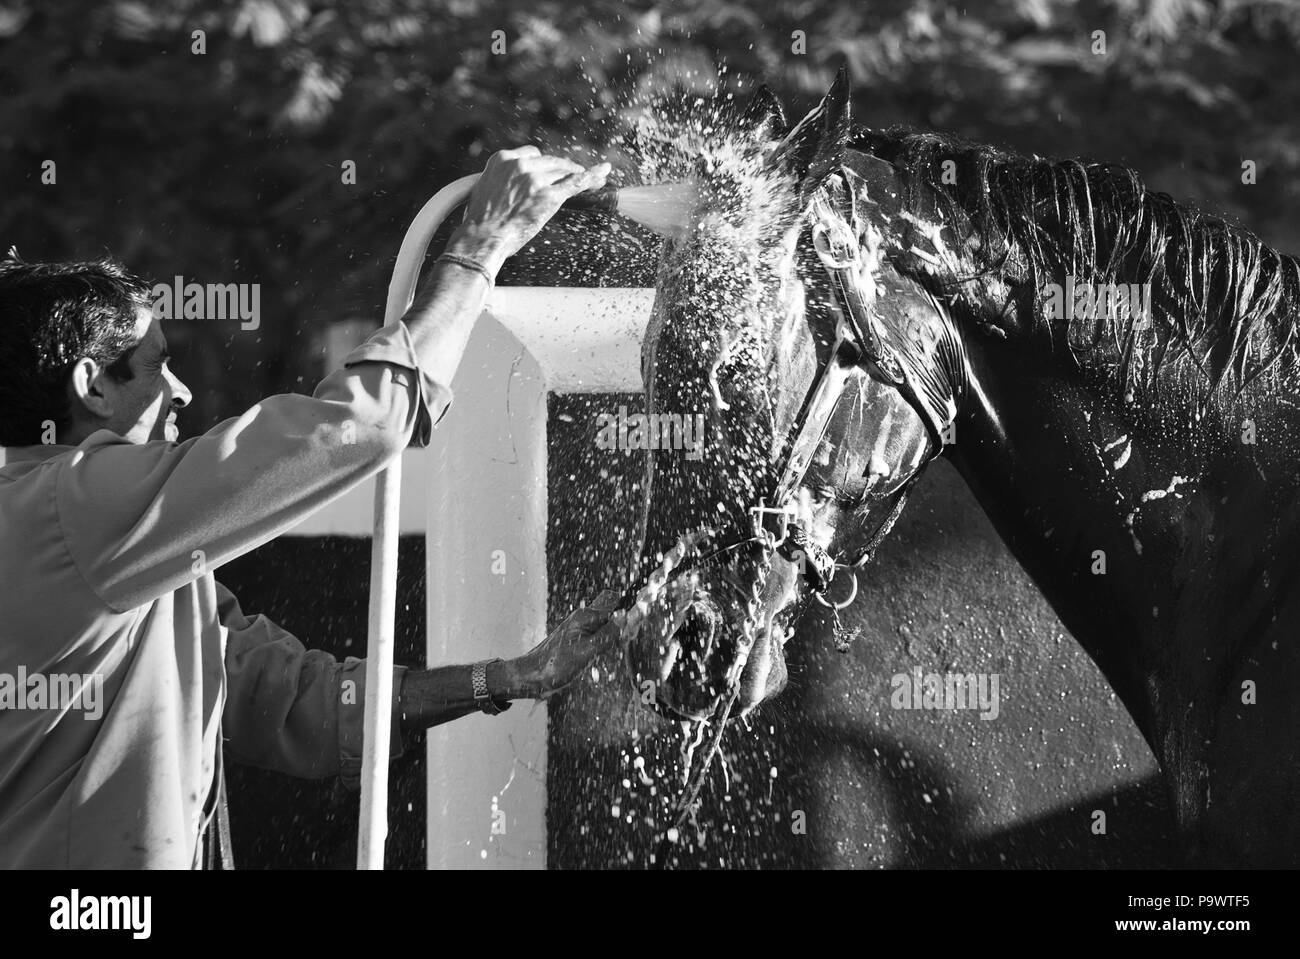 Racehorse being washed after morning training by Indian groom Stock Photo